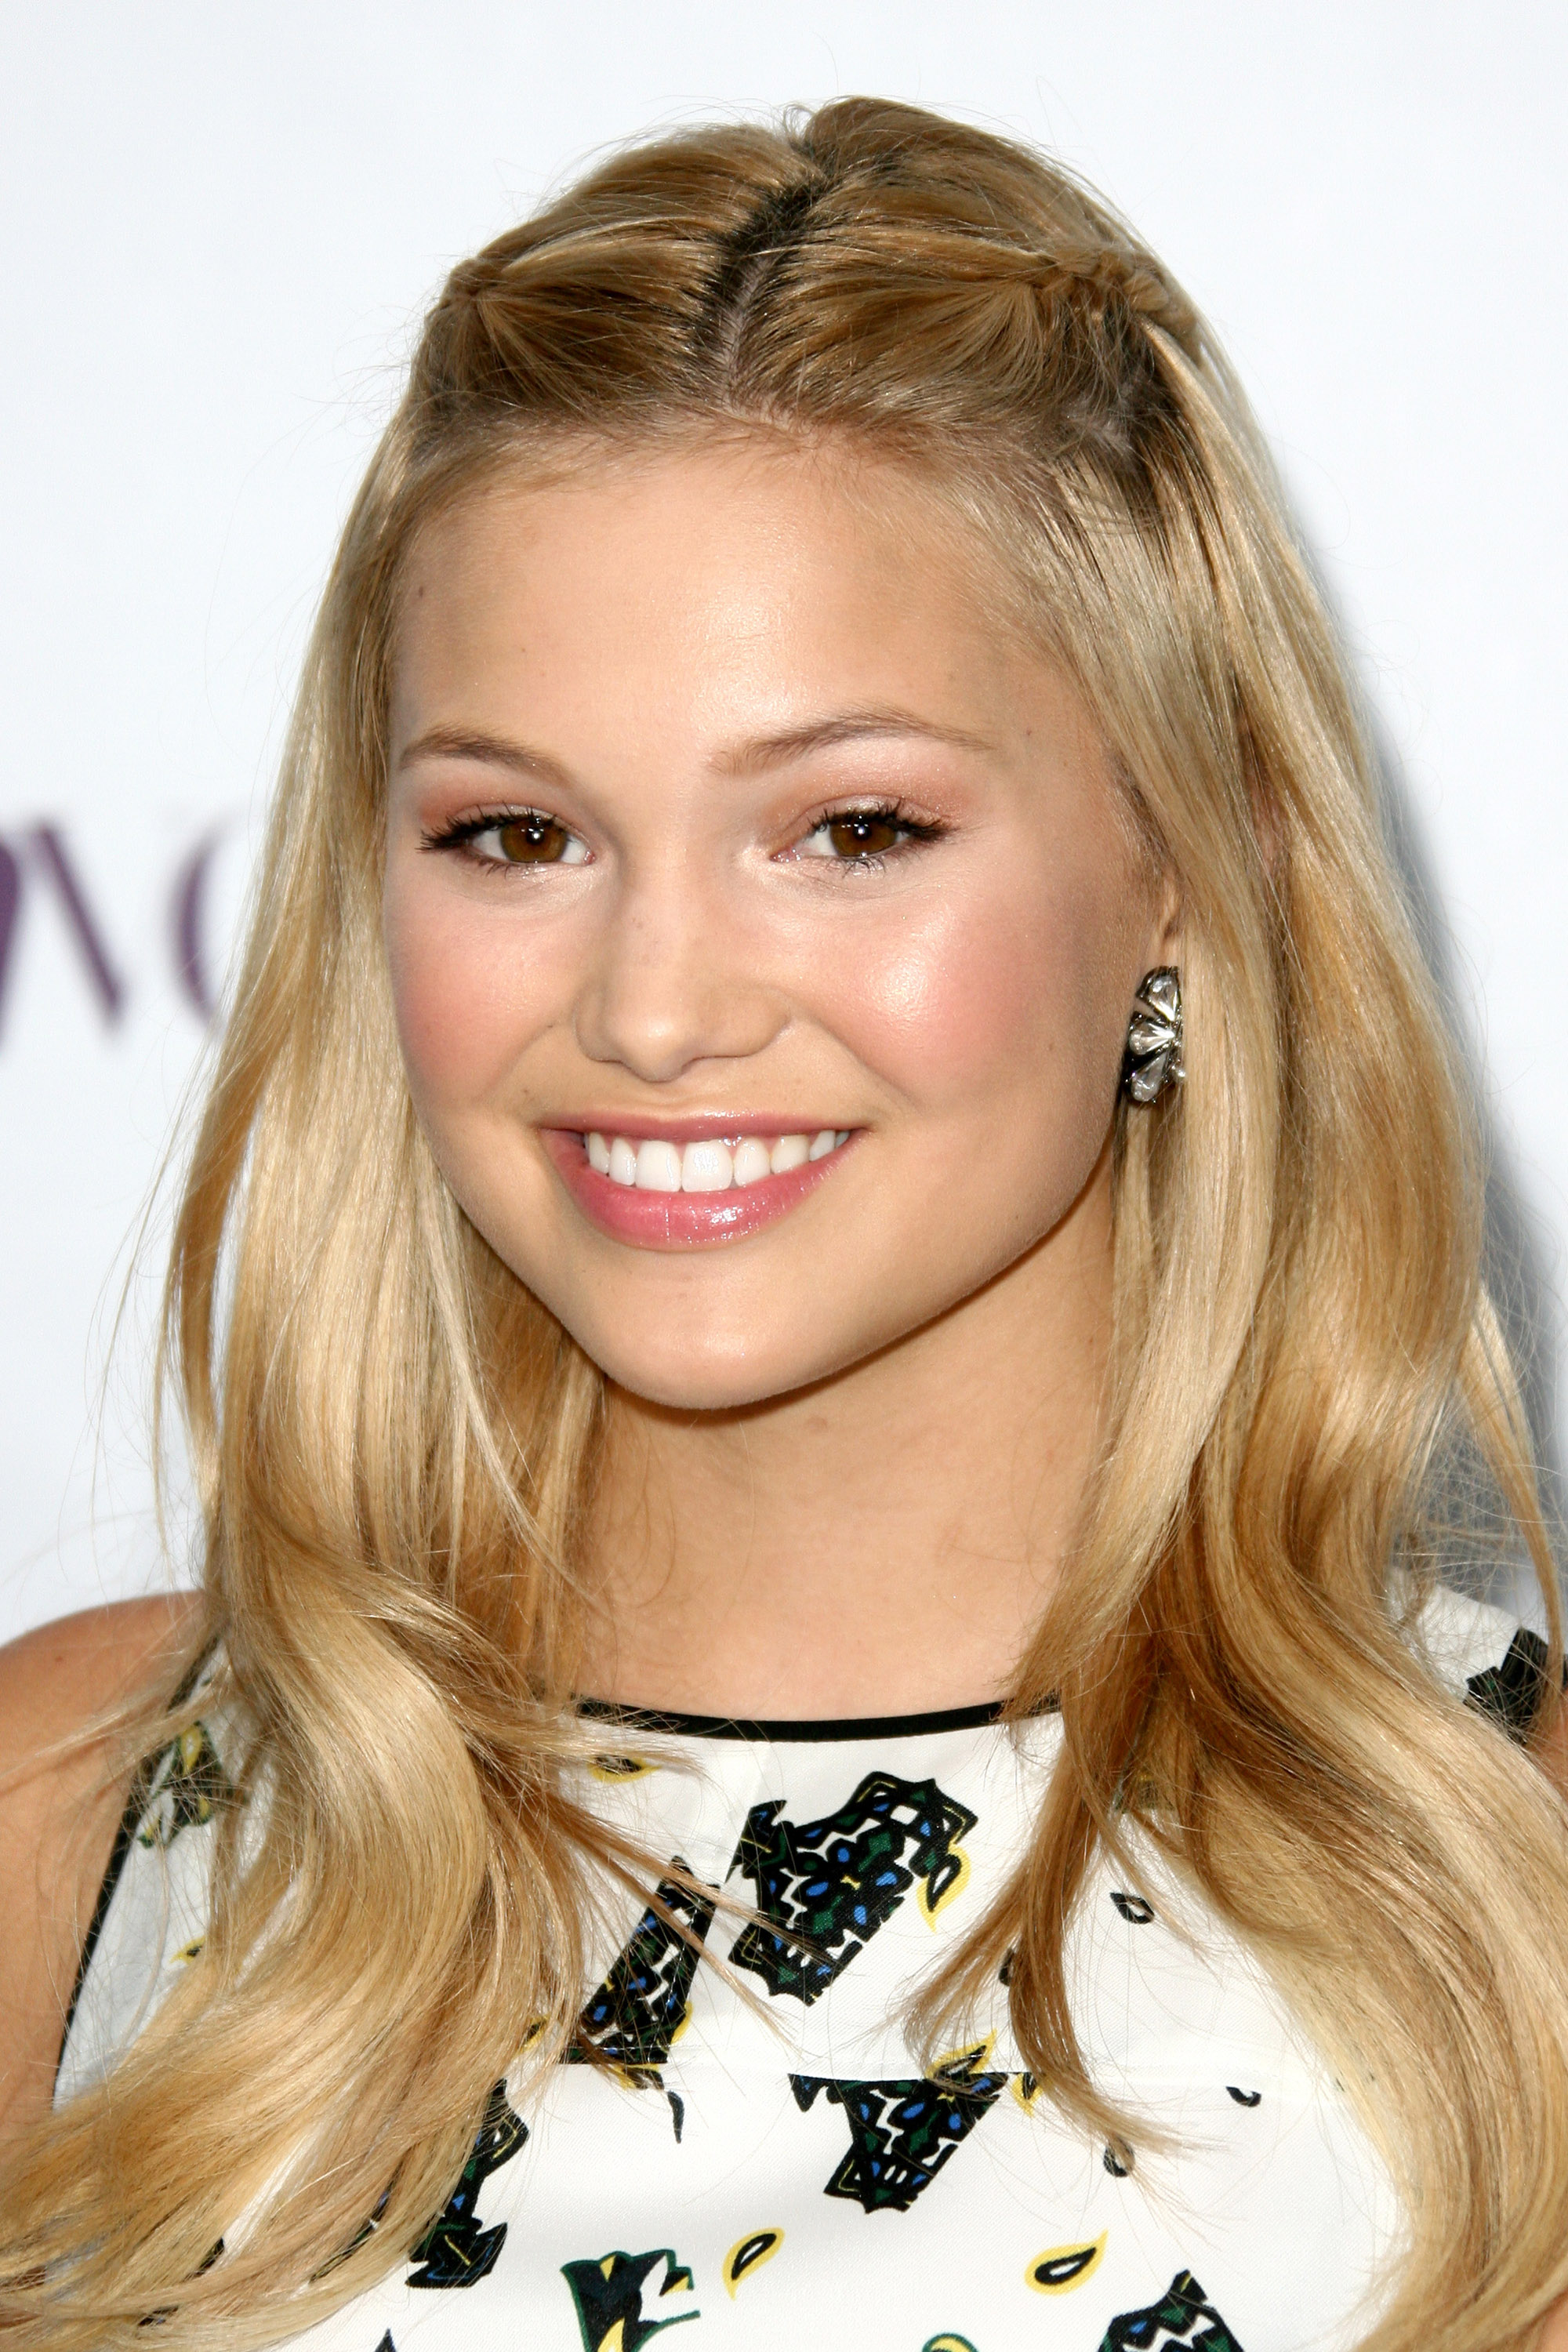 Olivia Holt Photos and Wallpapers